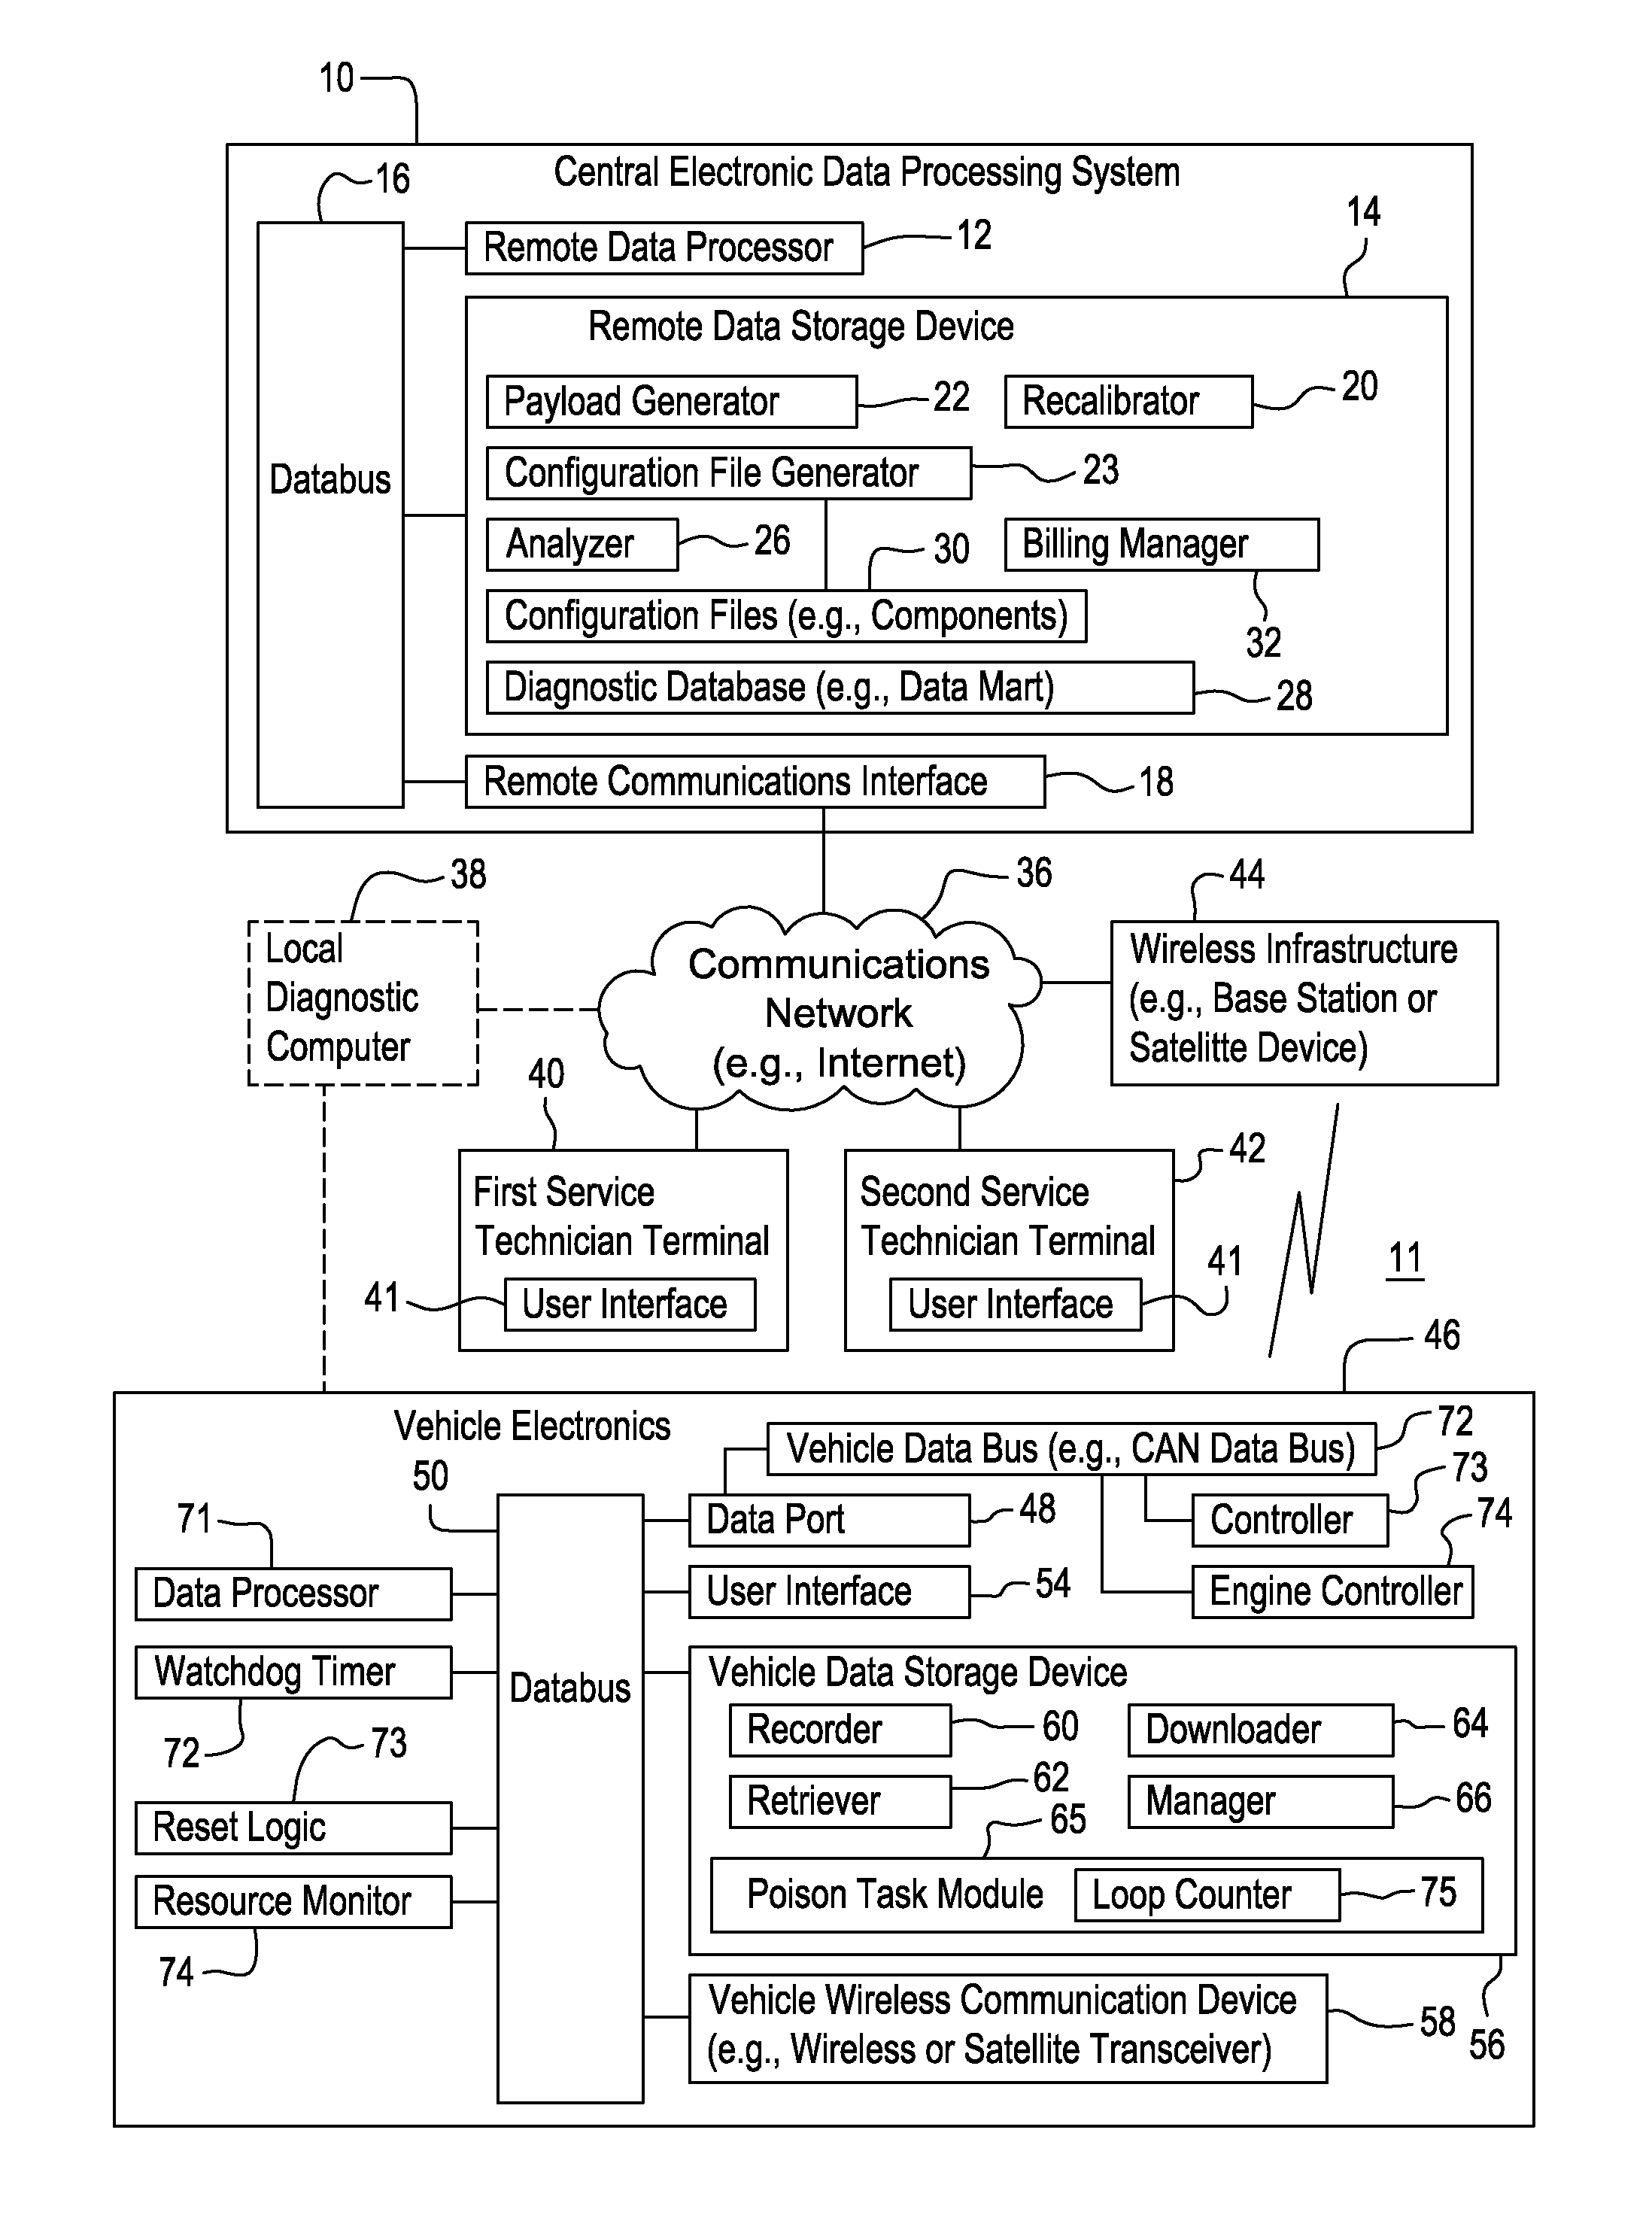 Method and system for performing diagnostics or software maintenance for a vehicle